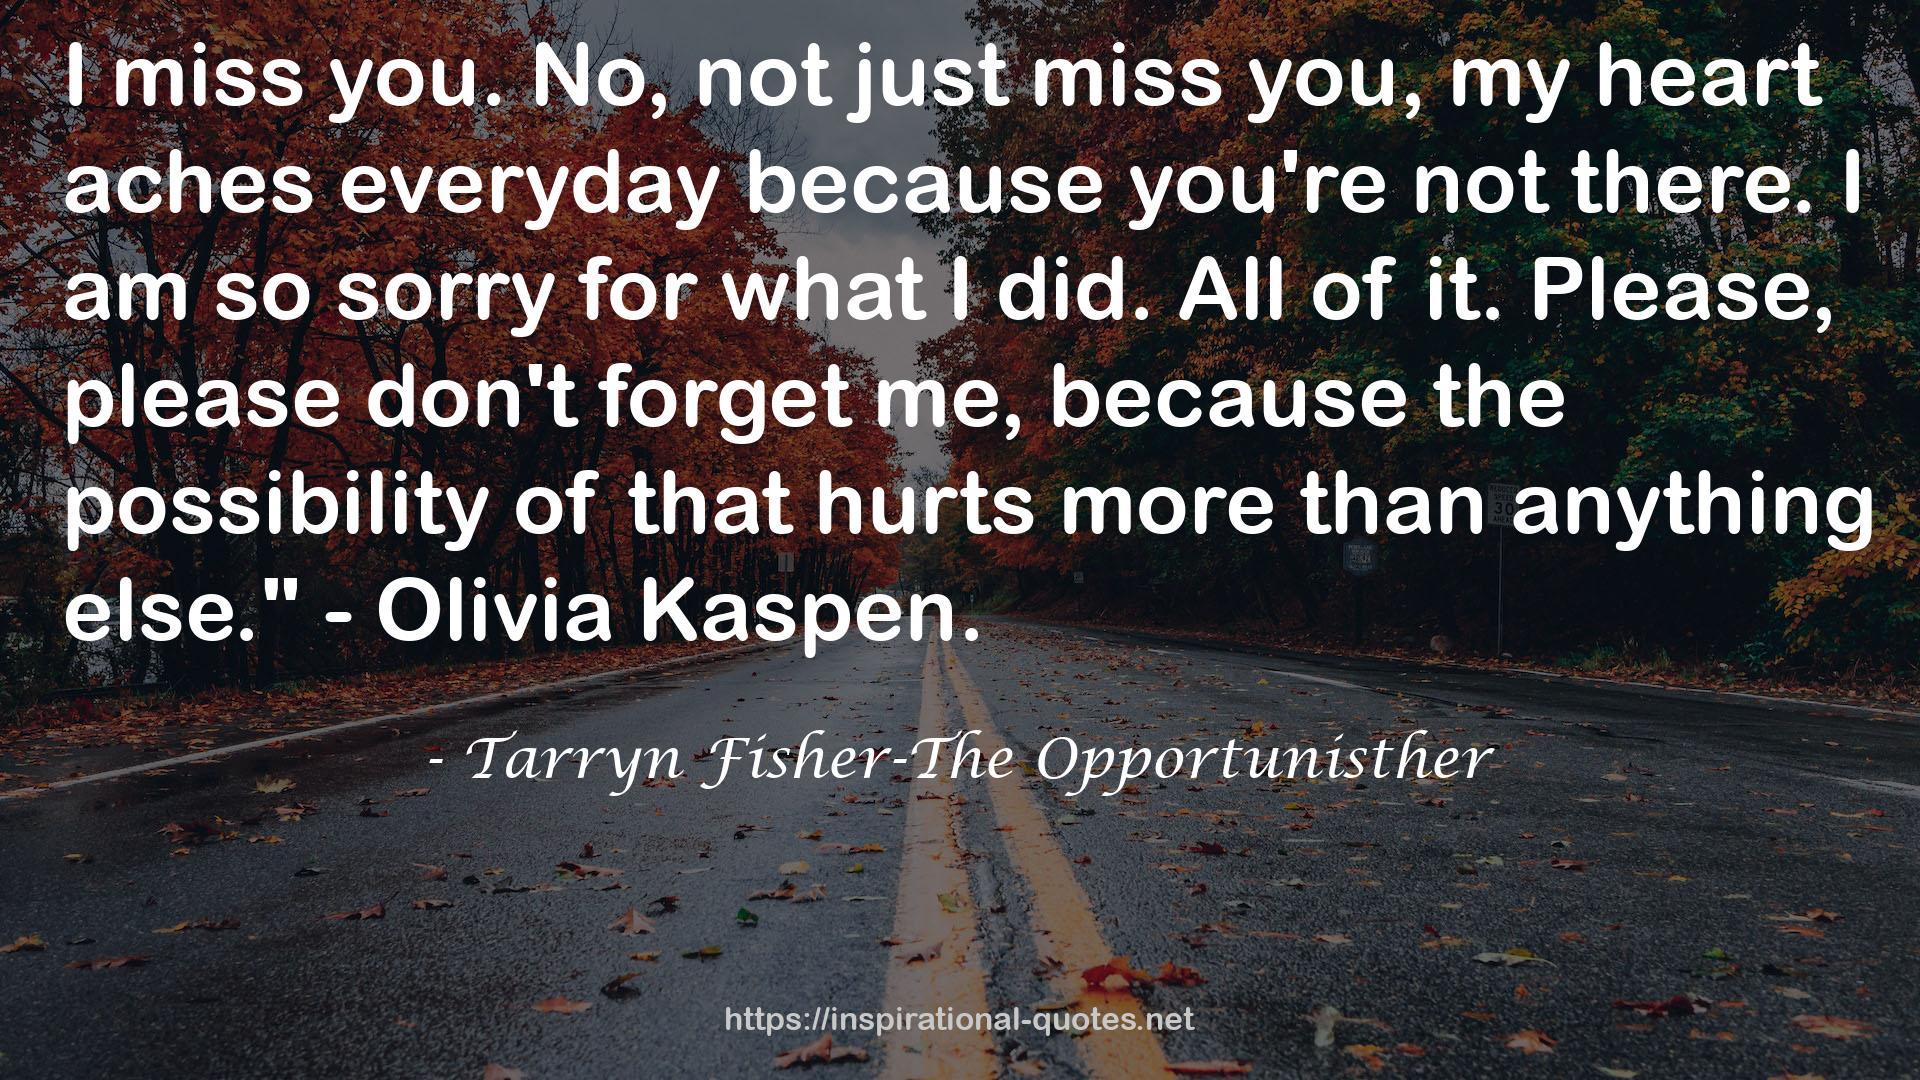 Tarryn Fisher-The Opportunisther QUOTES